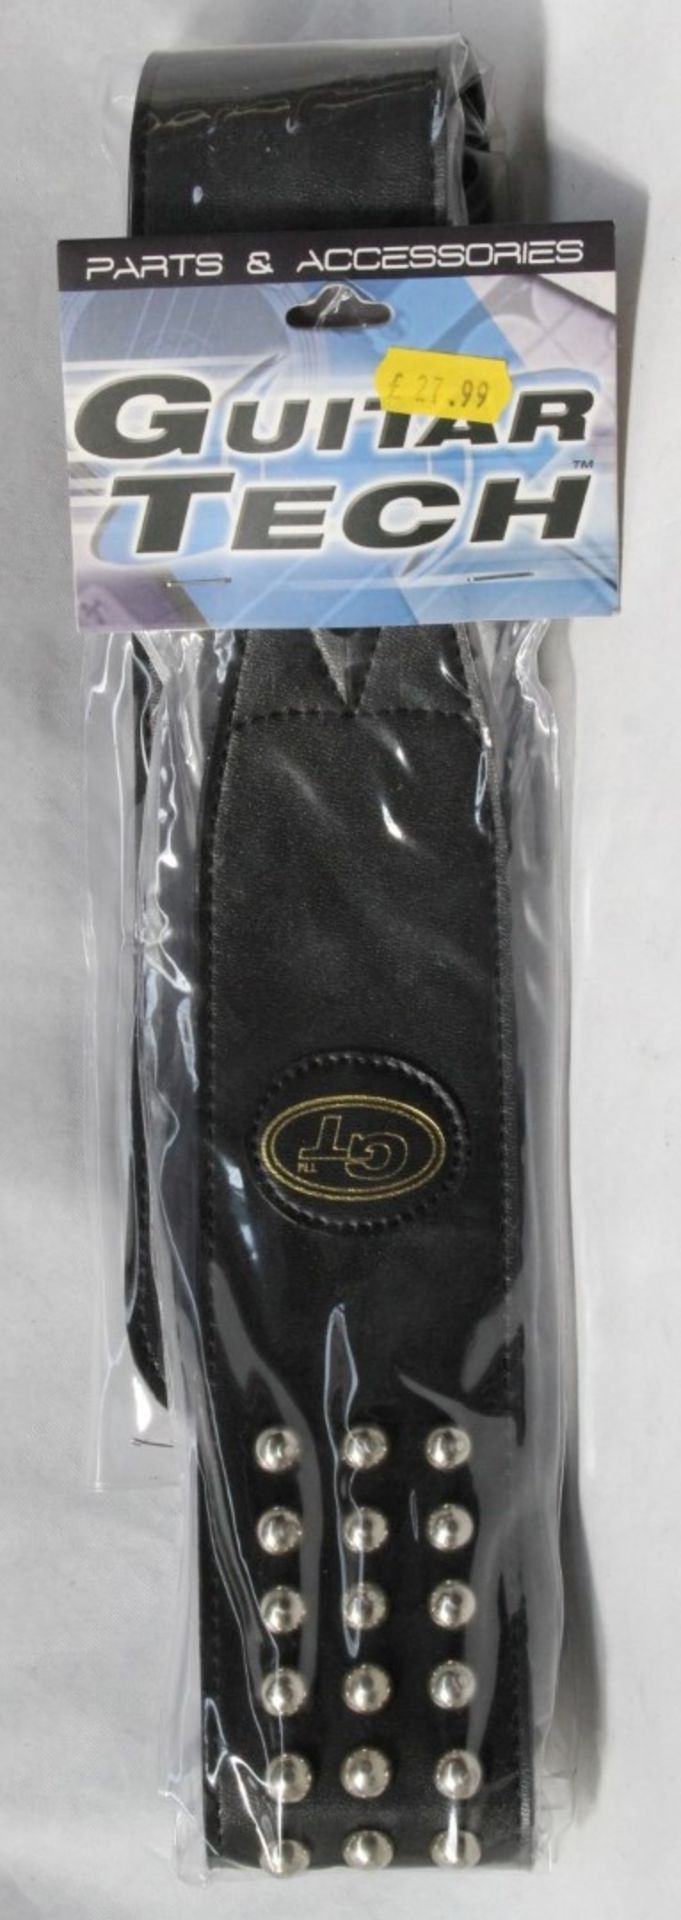 1 x Guitar Tech Leather Studded Guitar Strap - New in Packet - CL020 - Ref Pro173 - Location: Altrin - Image 5 of 8